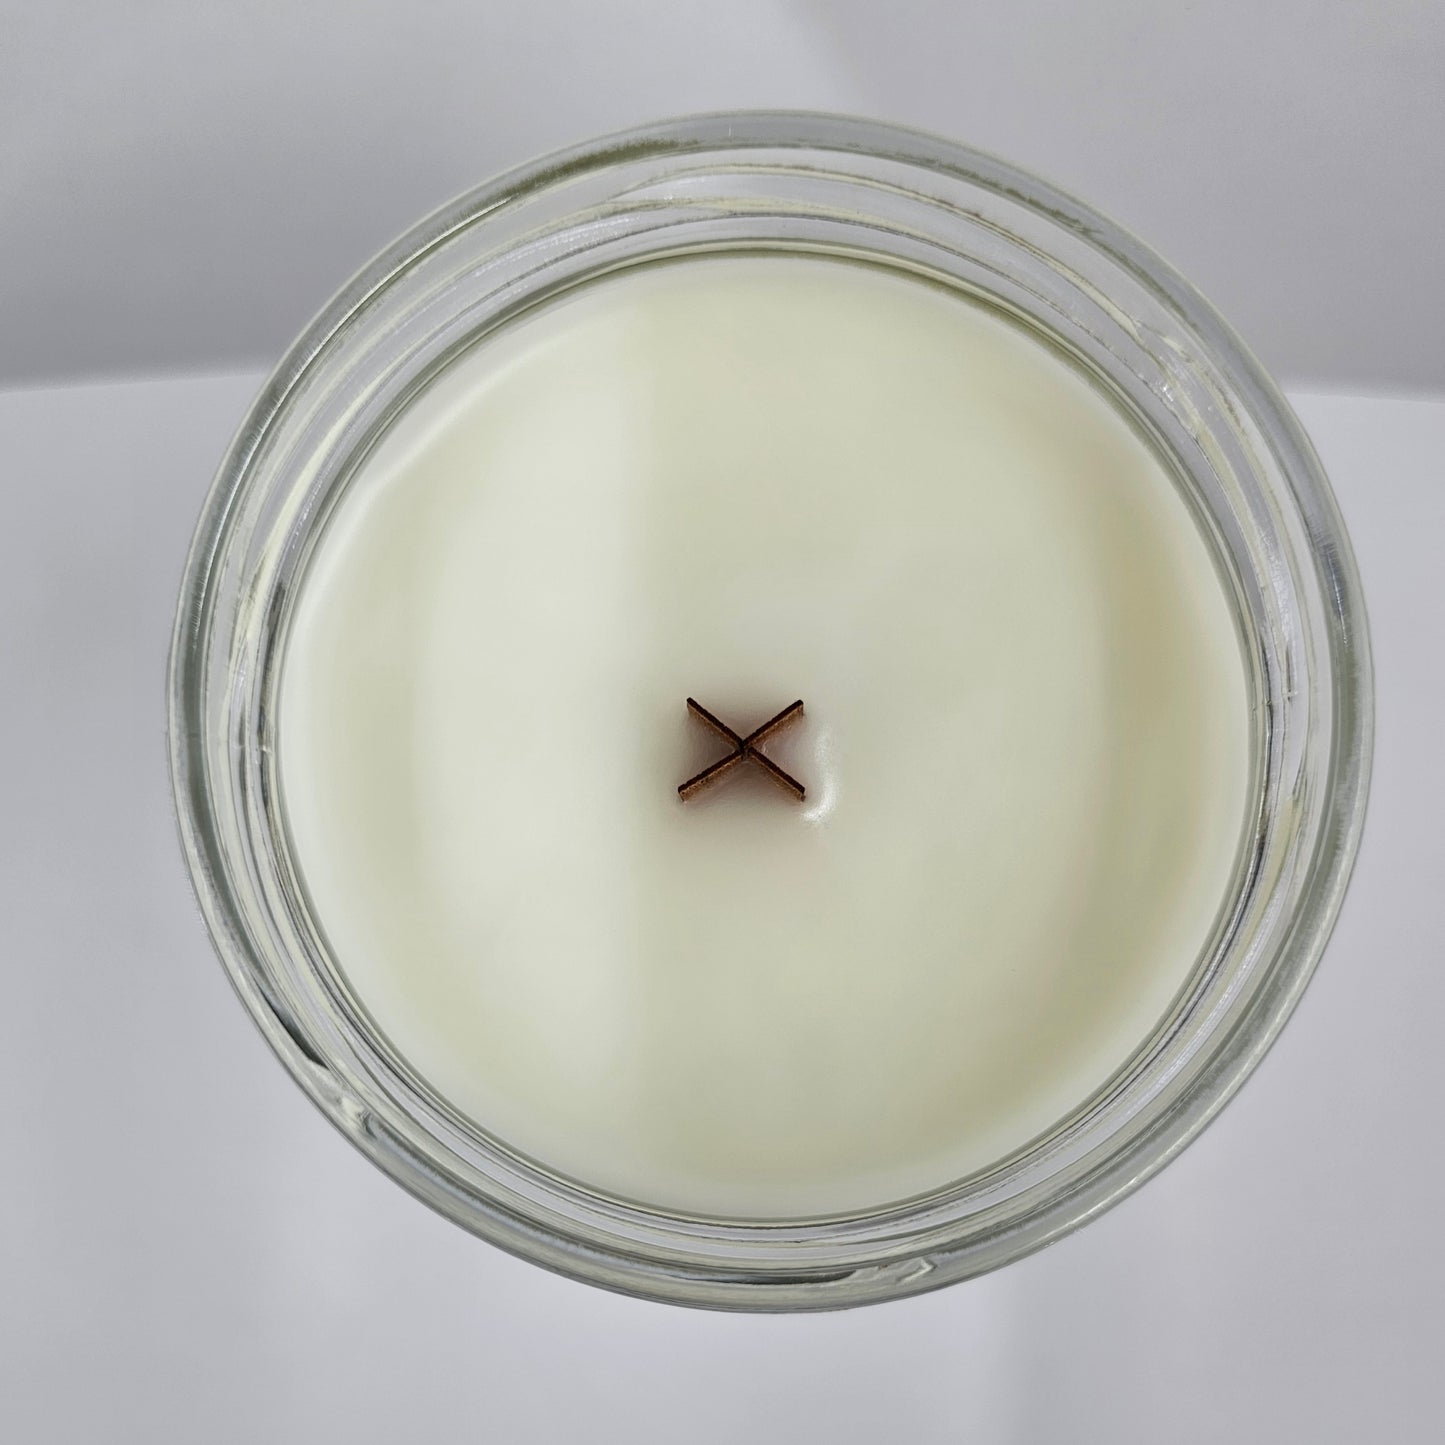 Birch & Black Pepper Coconut Soy Candle with Wooden X Wick